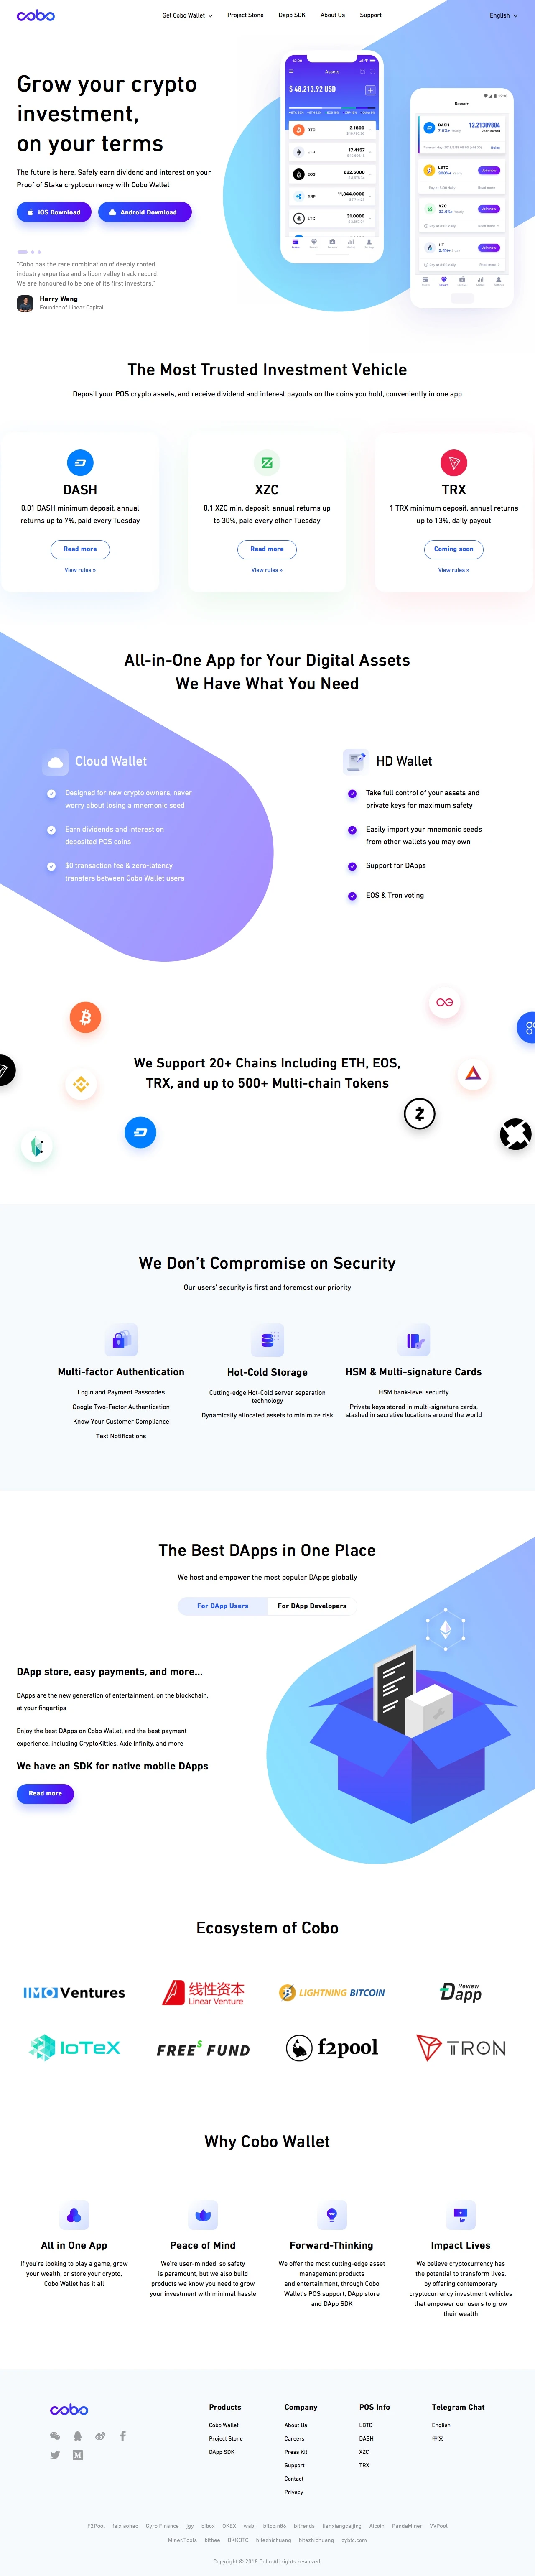 Cobo Wallet Landing Page Example: Cobo Wallet is a leading cryptocurrency wallet on iOS, Android. Supports Bitcoin, Ethereum, Litecoin, EOS, DASH, Zcoin, LBTC and other cryptocurrencies.